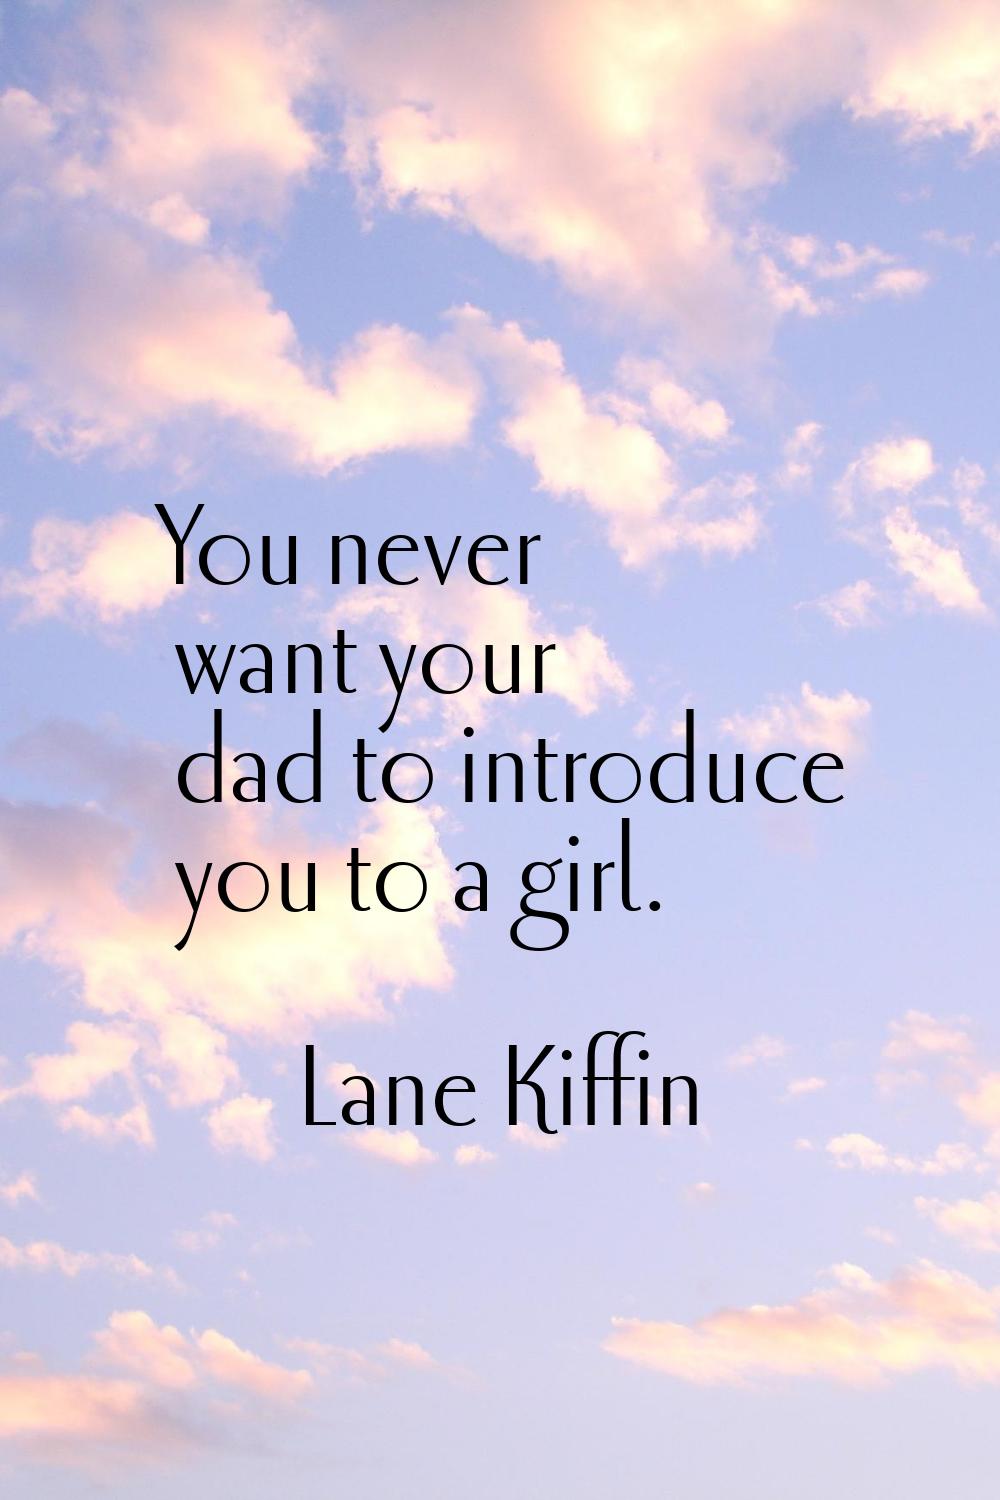 You never want your dad to introduce you to a girl.